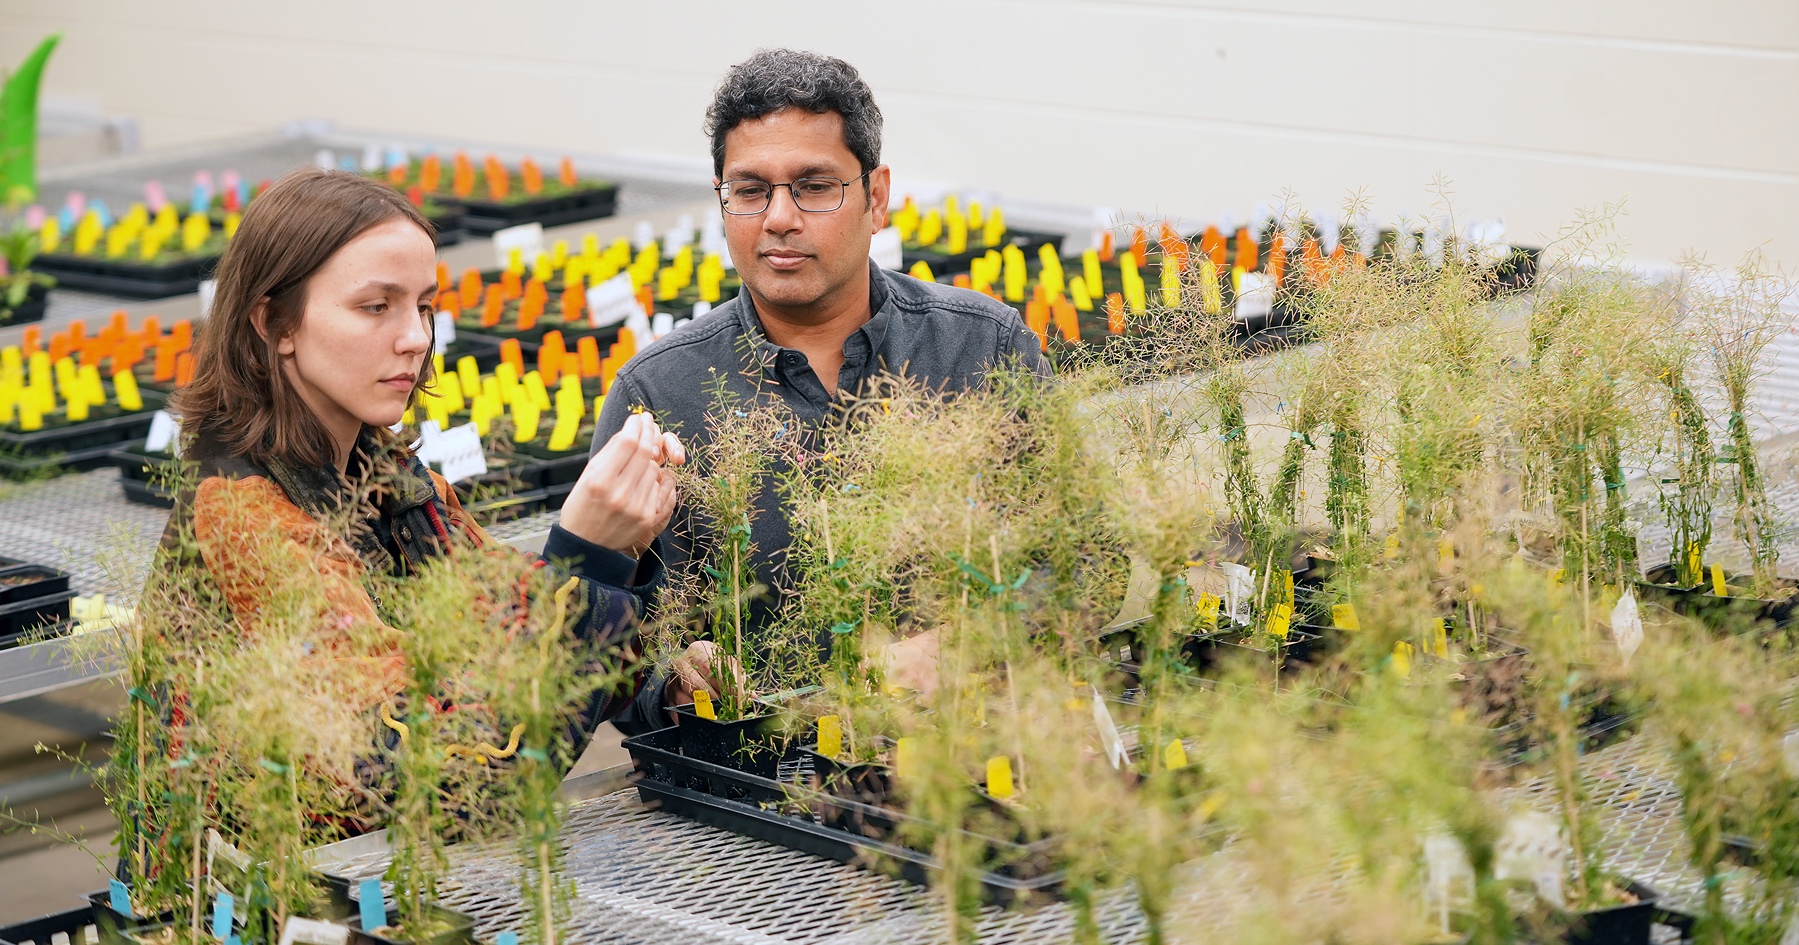 Kranthi Varala, assistant professor, and Rachel Kuhn, a junior, both in Purdue’s department of horticulture & landscape architecture, collect individual seed pods of genetically modified Arabidopsis plants to help assay the genetic changes leading to higher seed oil content.